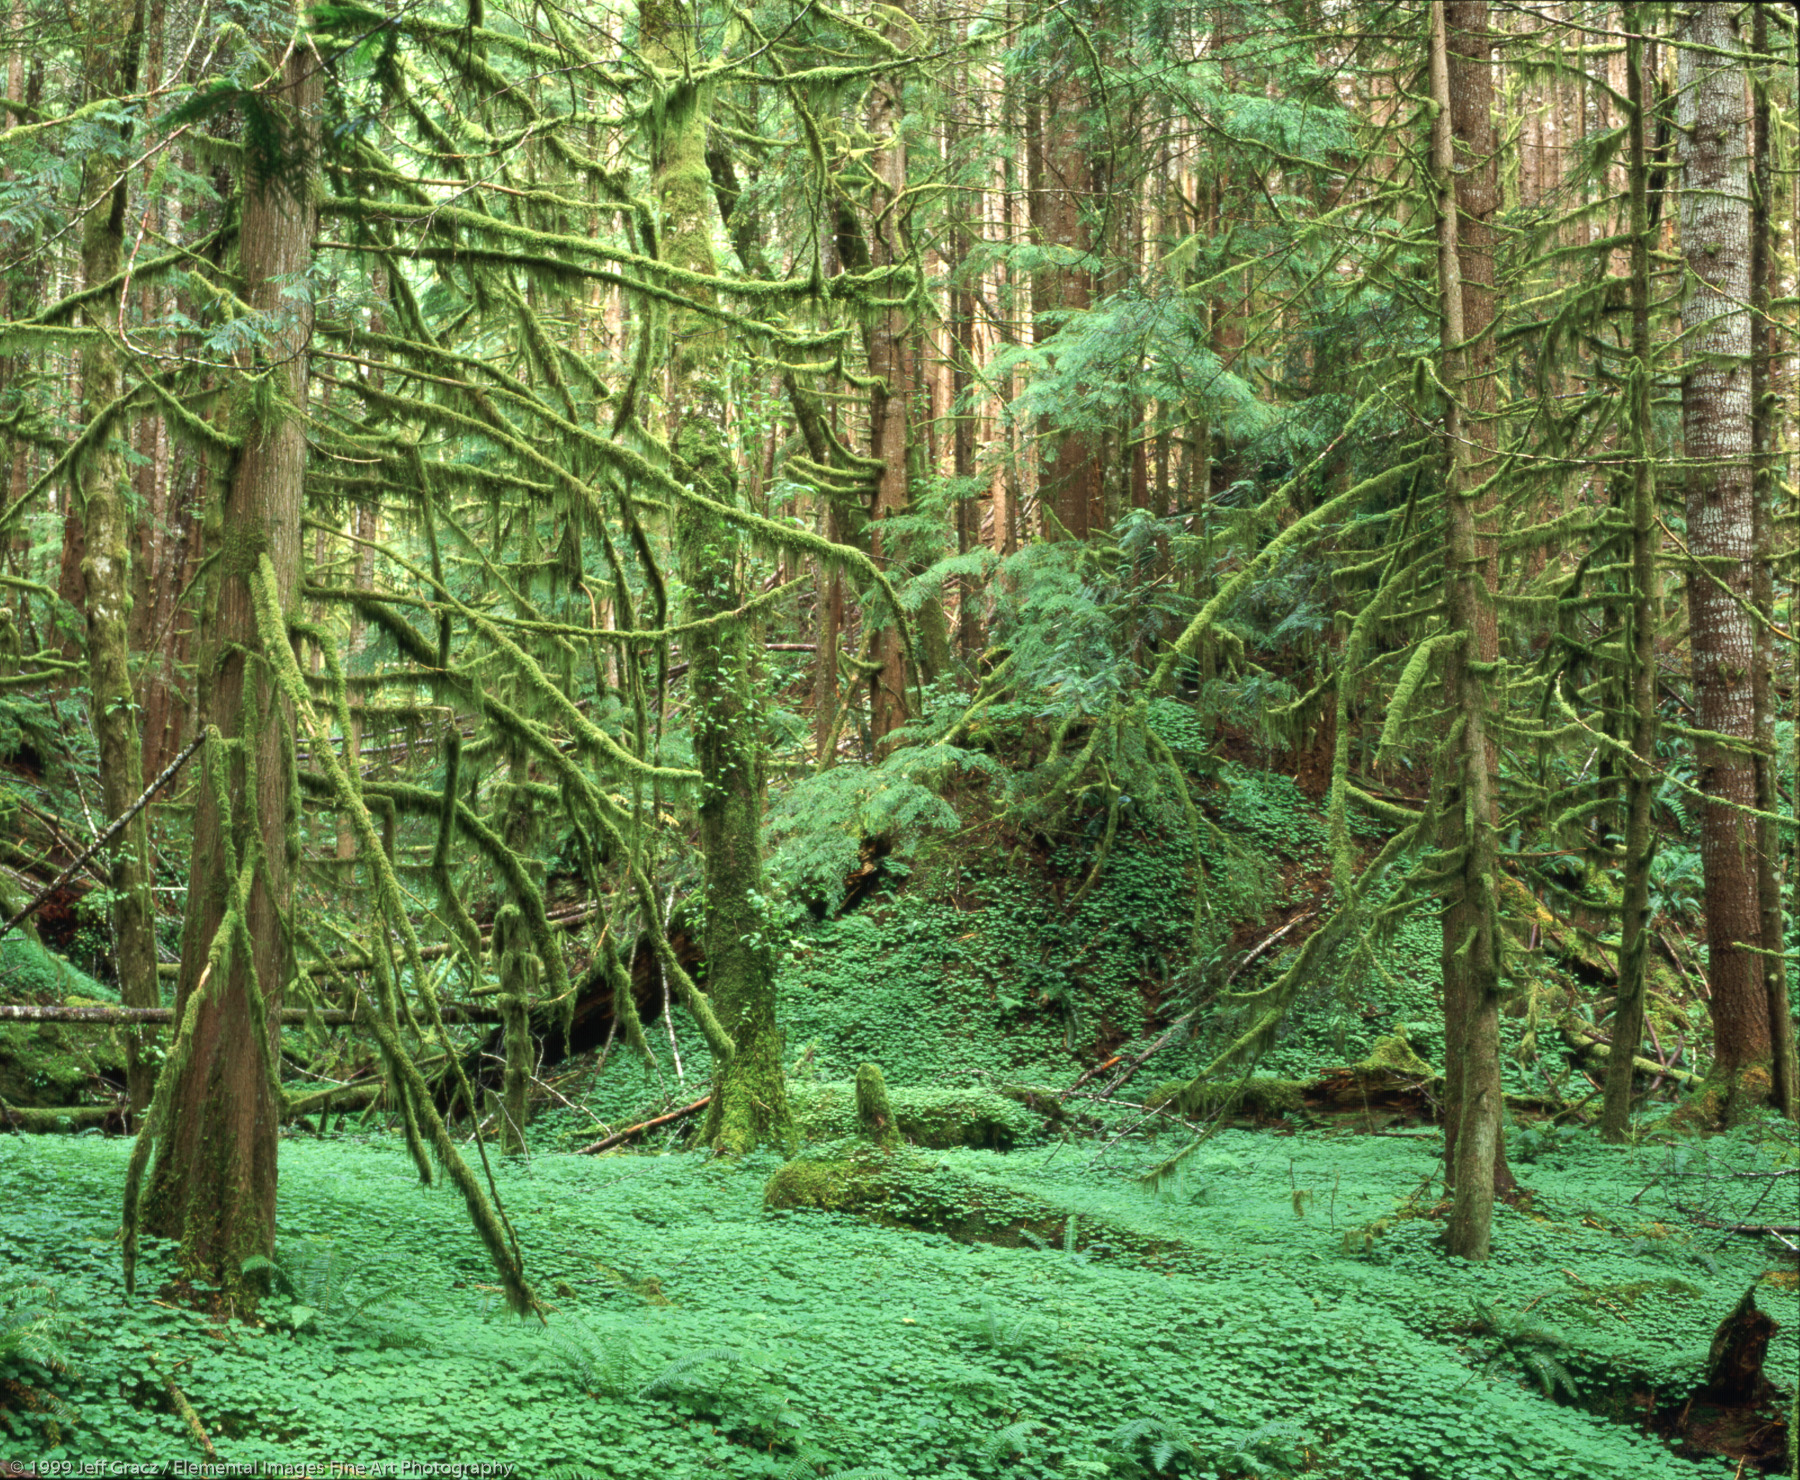 lushness. moss shrouded tree boughs, ferns, sorrel | clatsop state forest | OR | usa - © © 1999 Jeff Gracz / Elemental Images Fine Art Photography - All Rights Reserved Worldwide